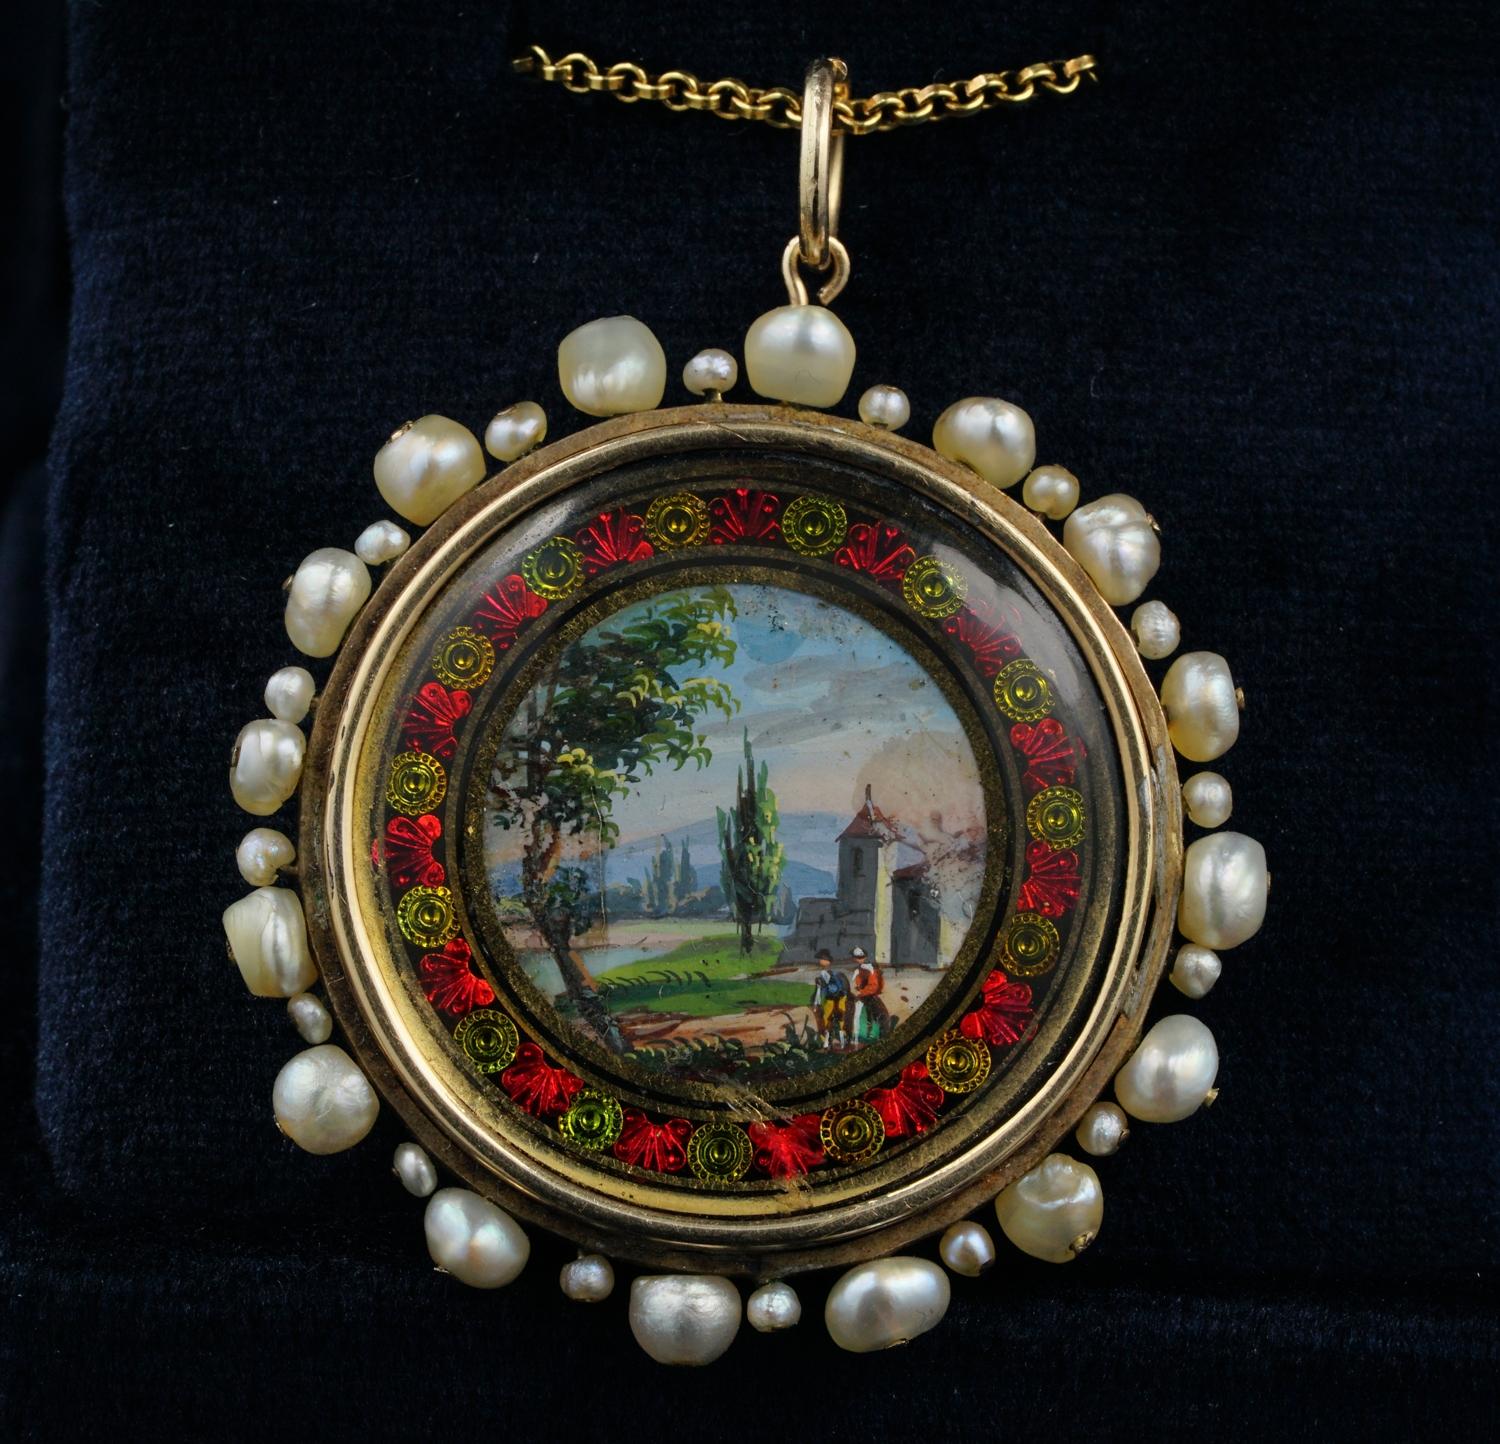 Views in Memory

Magnificent Georgian Miniature 1800 ca beautifully hand painted with precious enamelling work depicting probably an Italian view with two figures, finely worked with lovely colours, full of details
Framed by amazing enamelling work